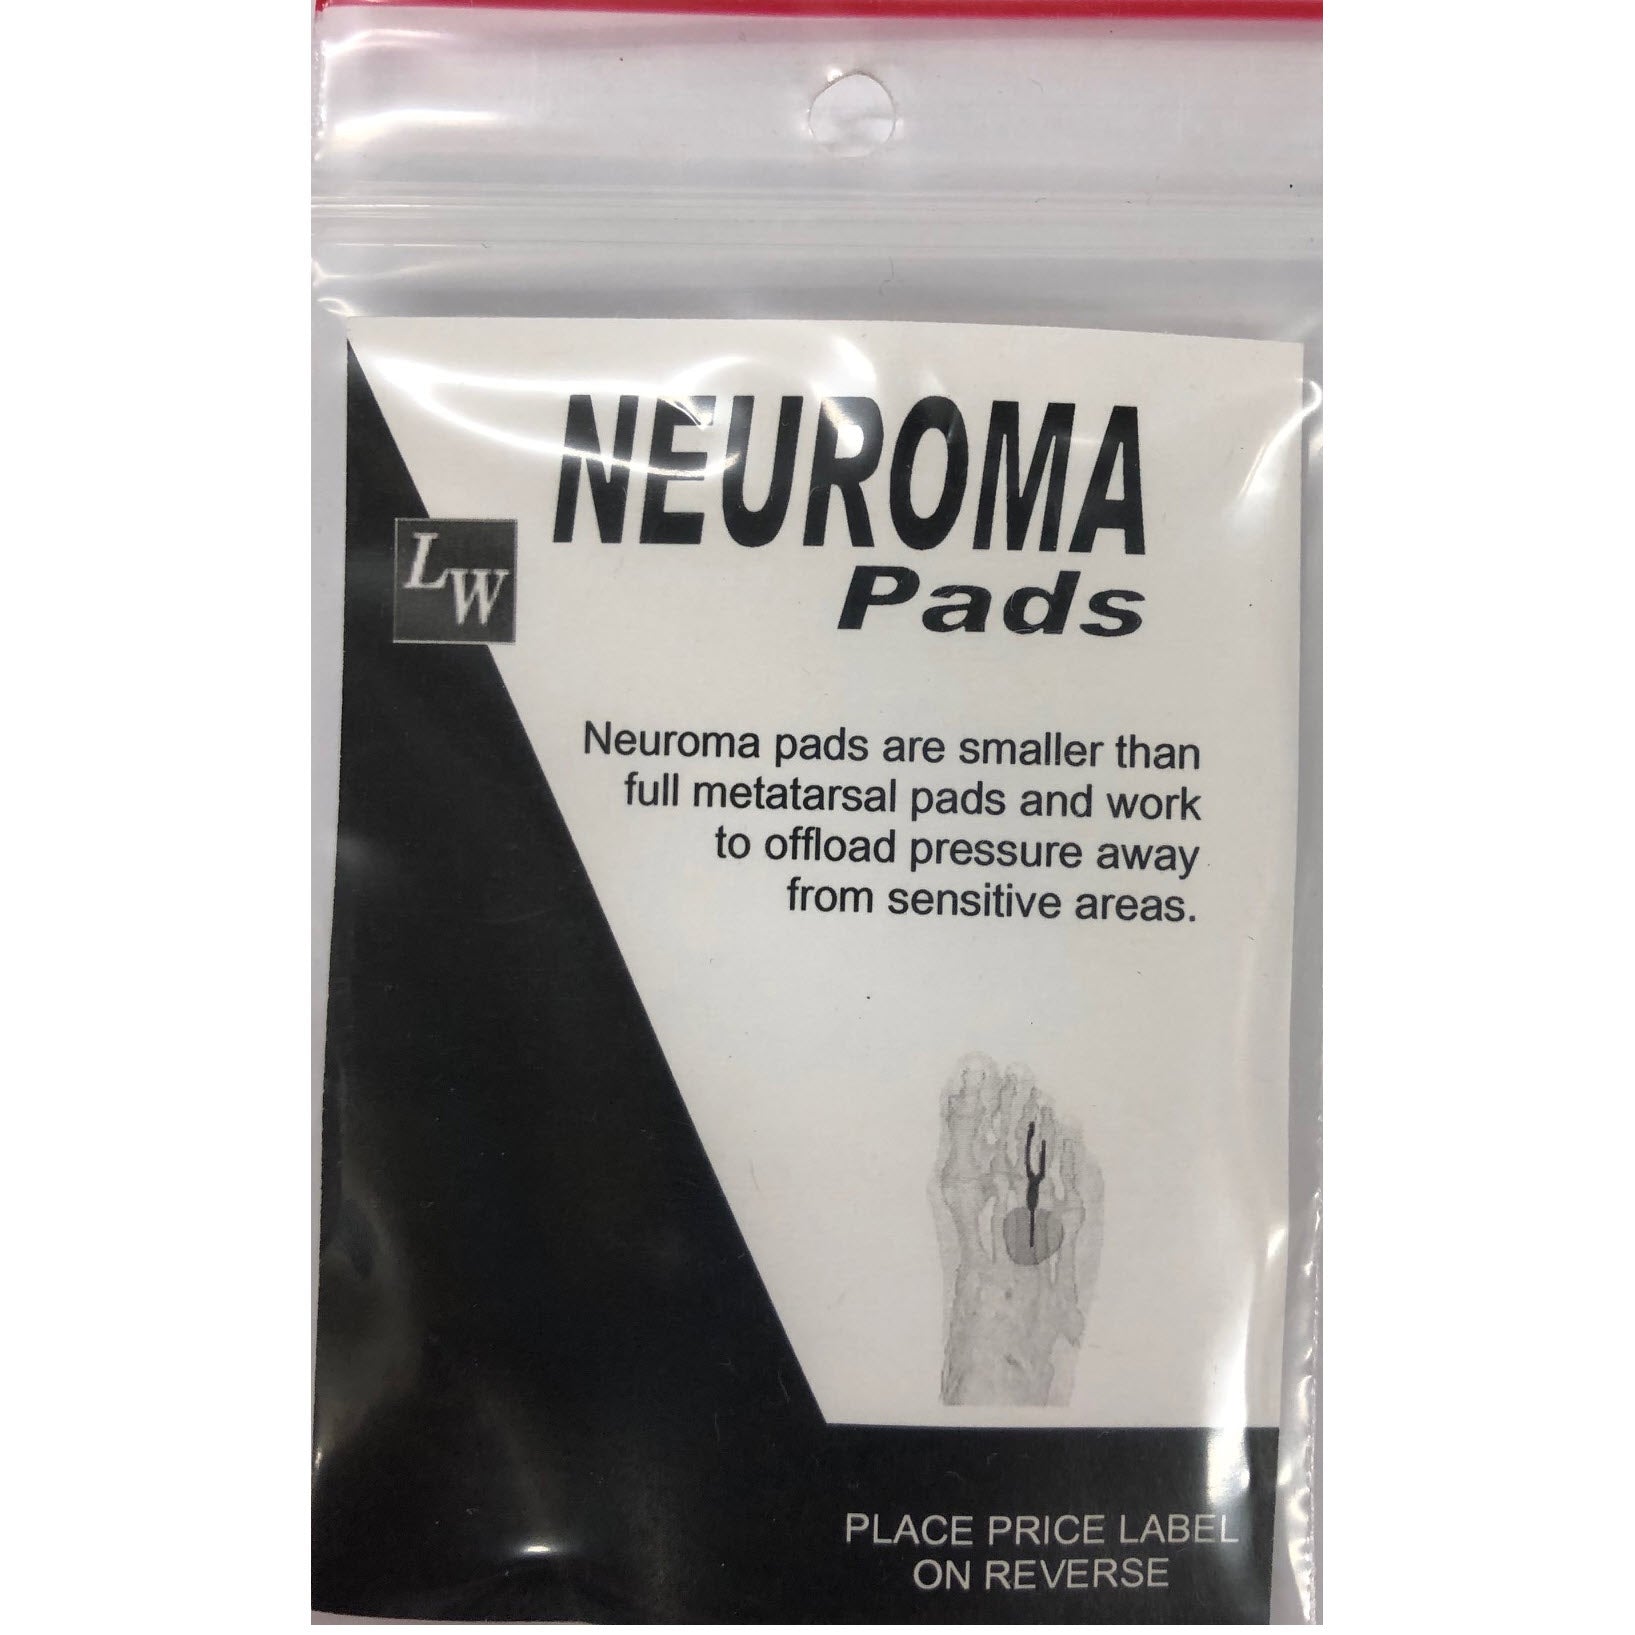 Packaging of Dr. Jill's LW FOOT CARE ADHESIVE NEUROMA PAD designed to alleviate pressure from sensitive areas of the foot, fabricated with latex-free materials.